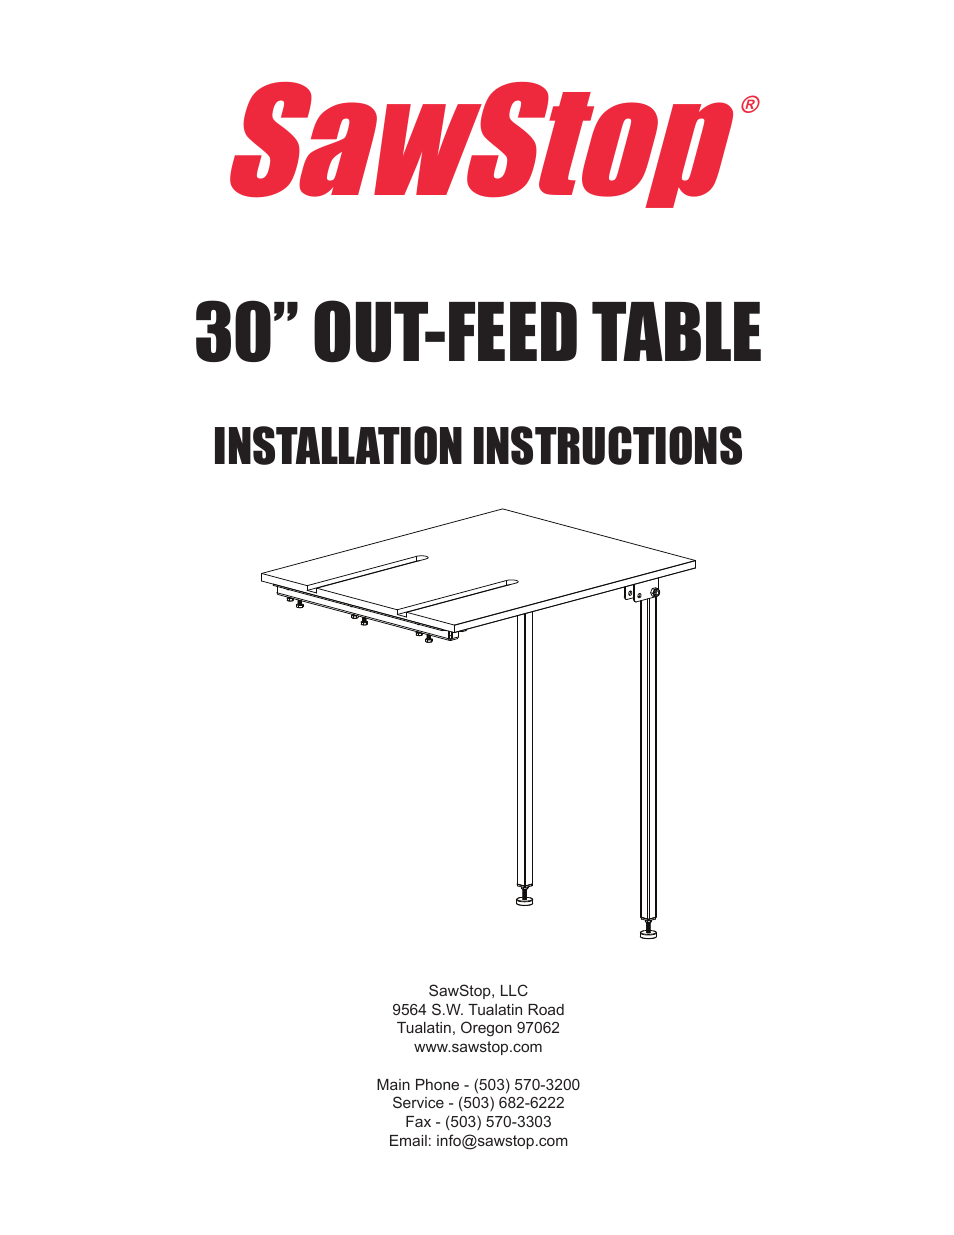 Out-Feed Table